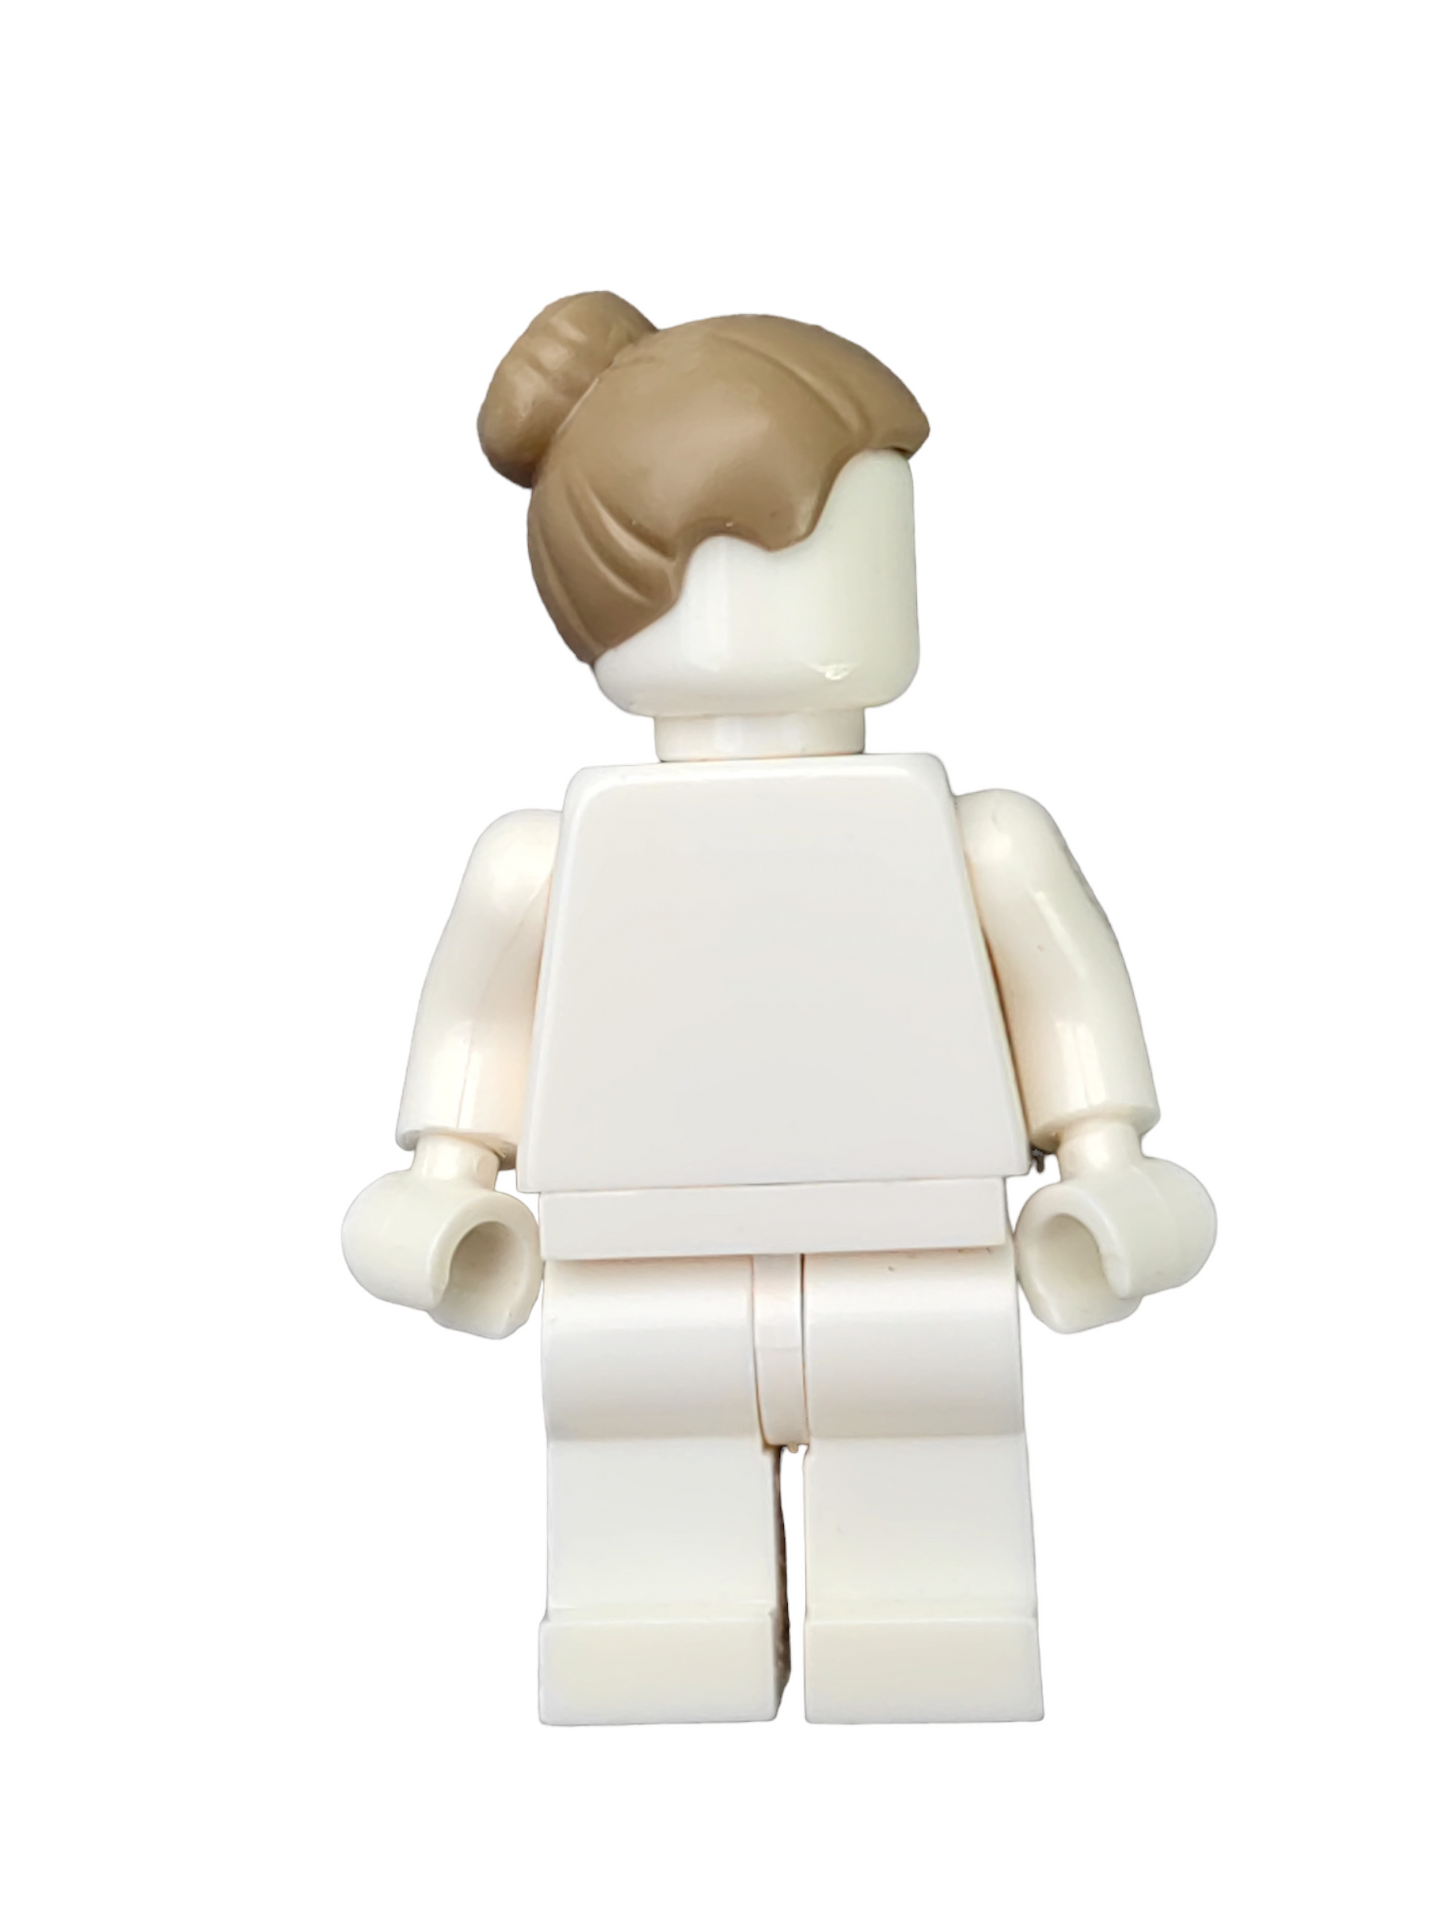 LEGO Wig, Brown  Hair with a Bun Knot at the Top - UB1316